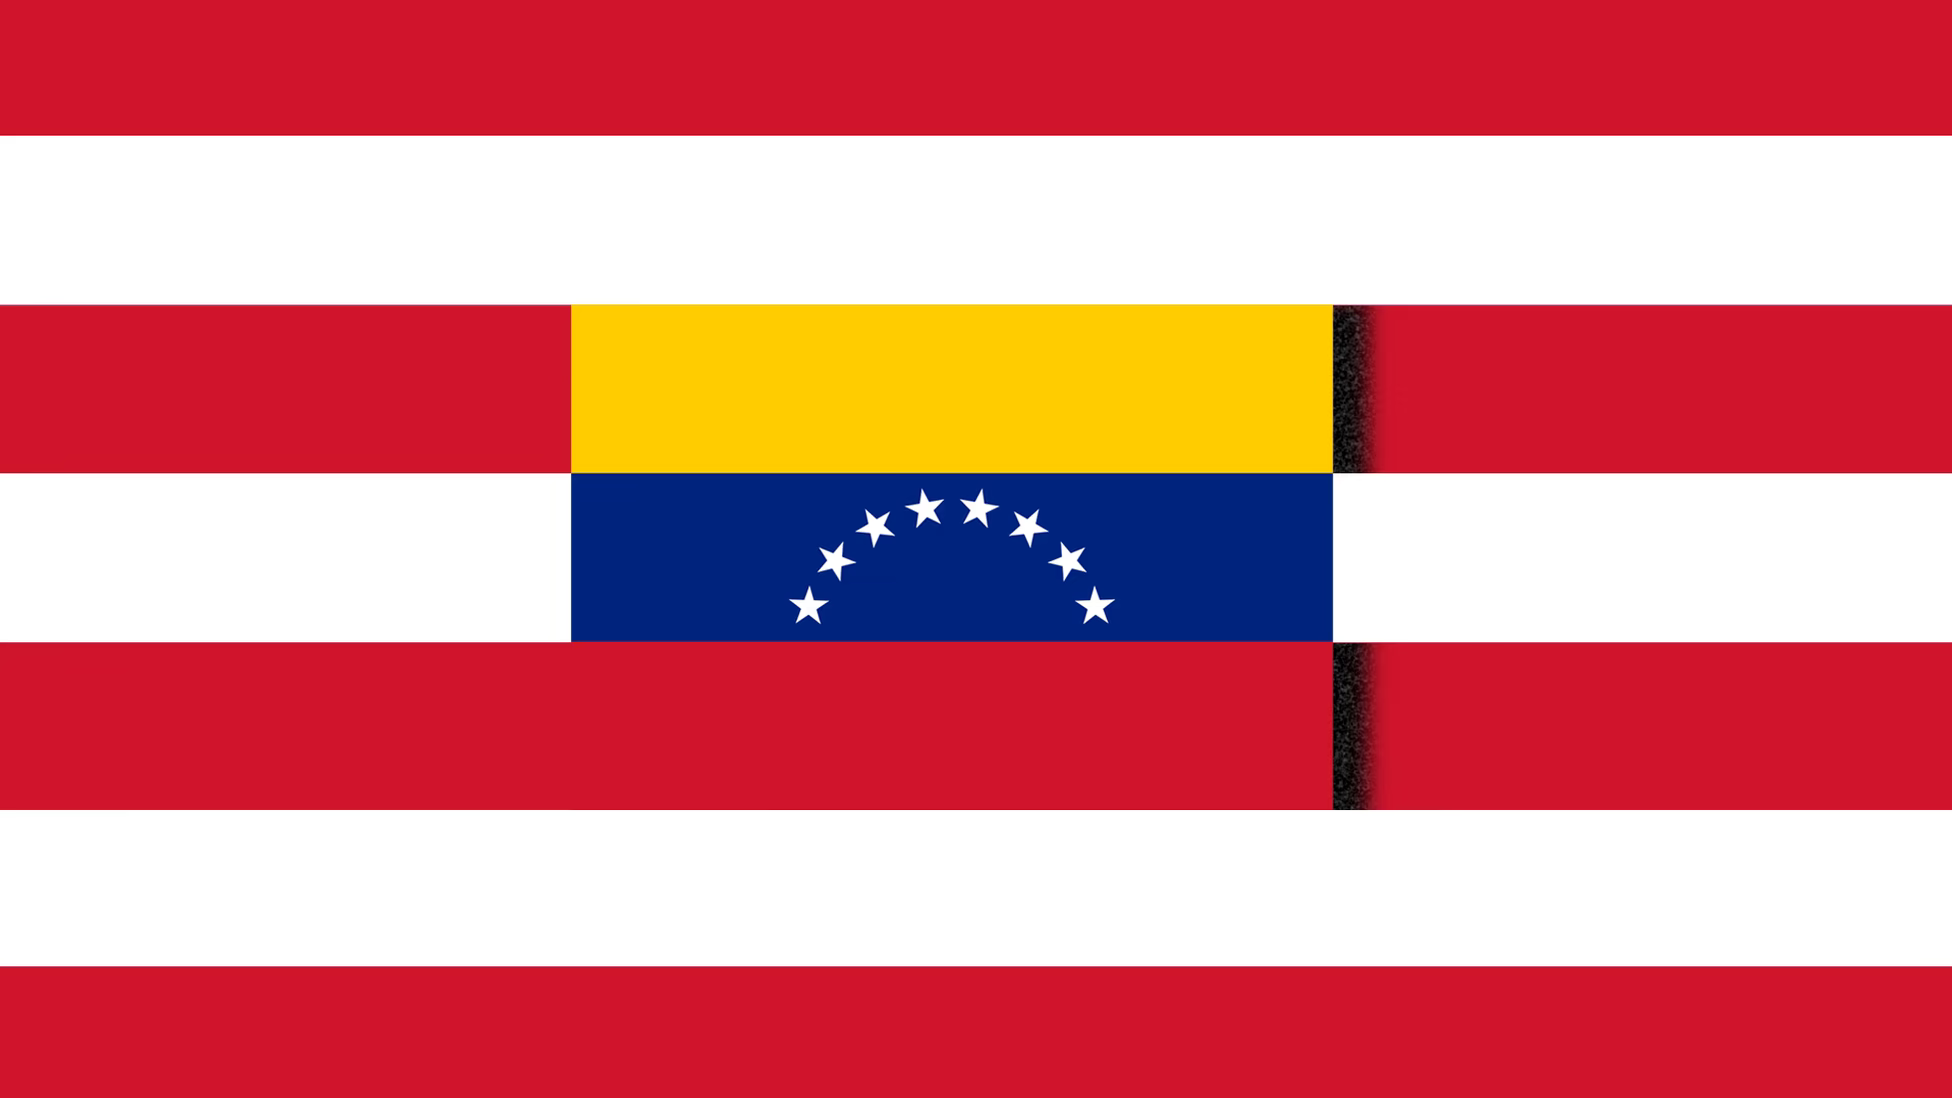 A Chance for a Reset on Venezuela's display image